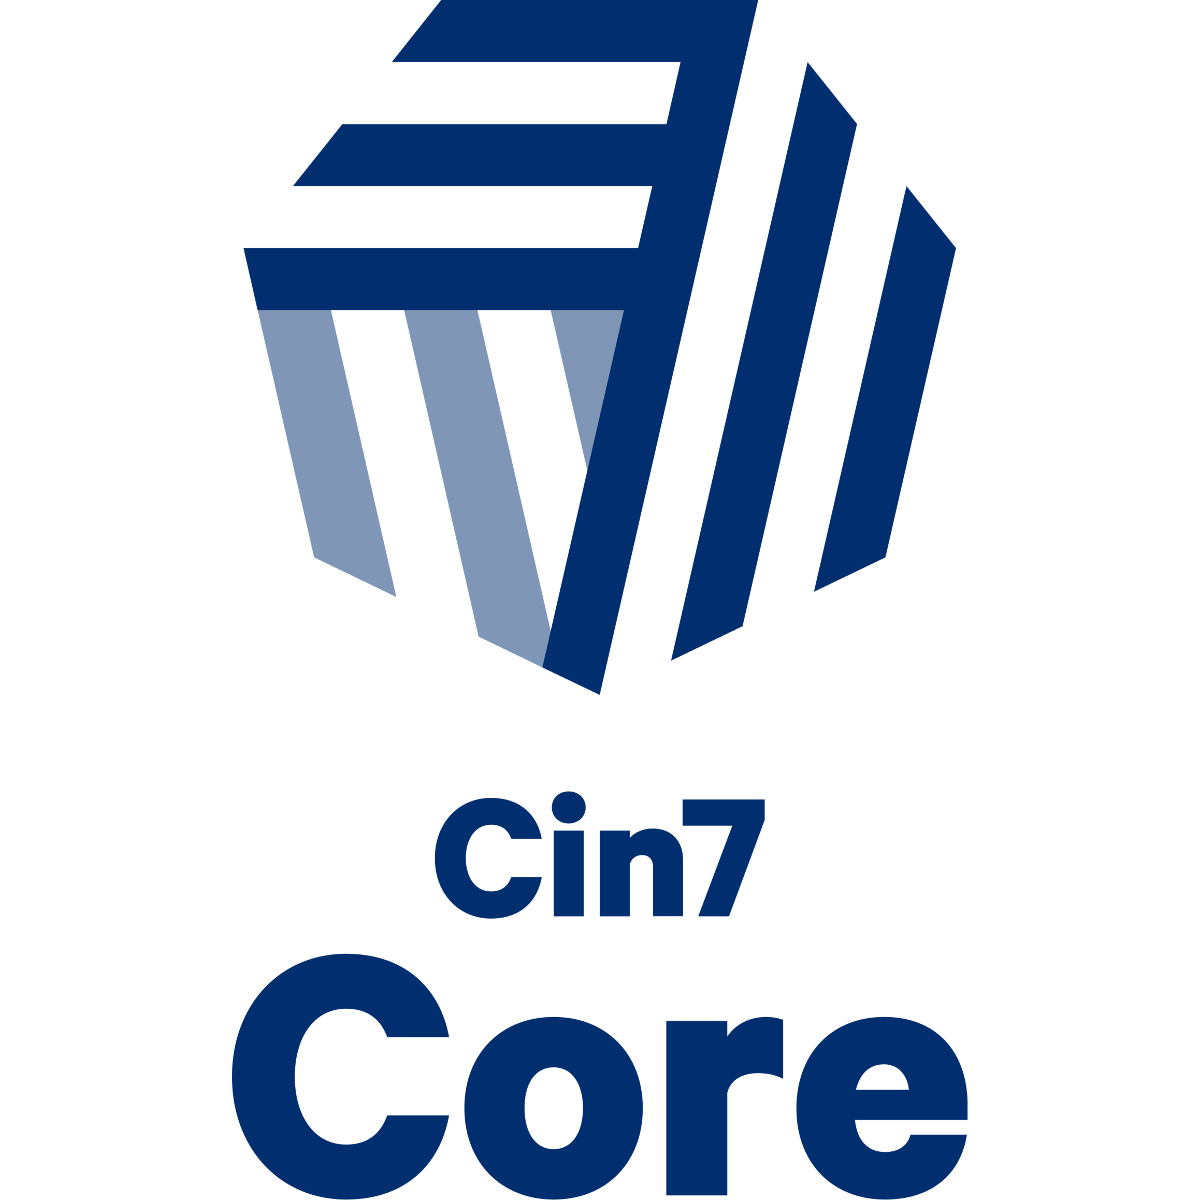 Cin7 Core for Shopify